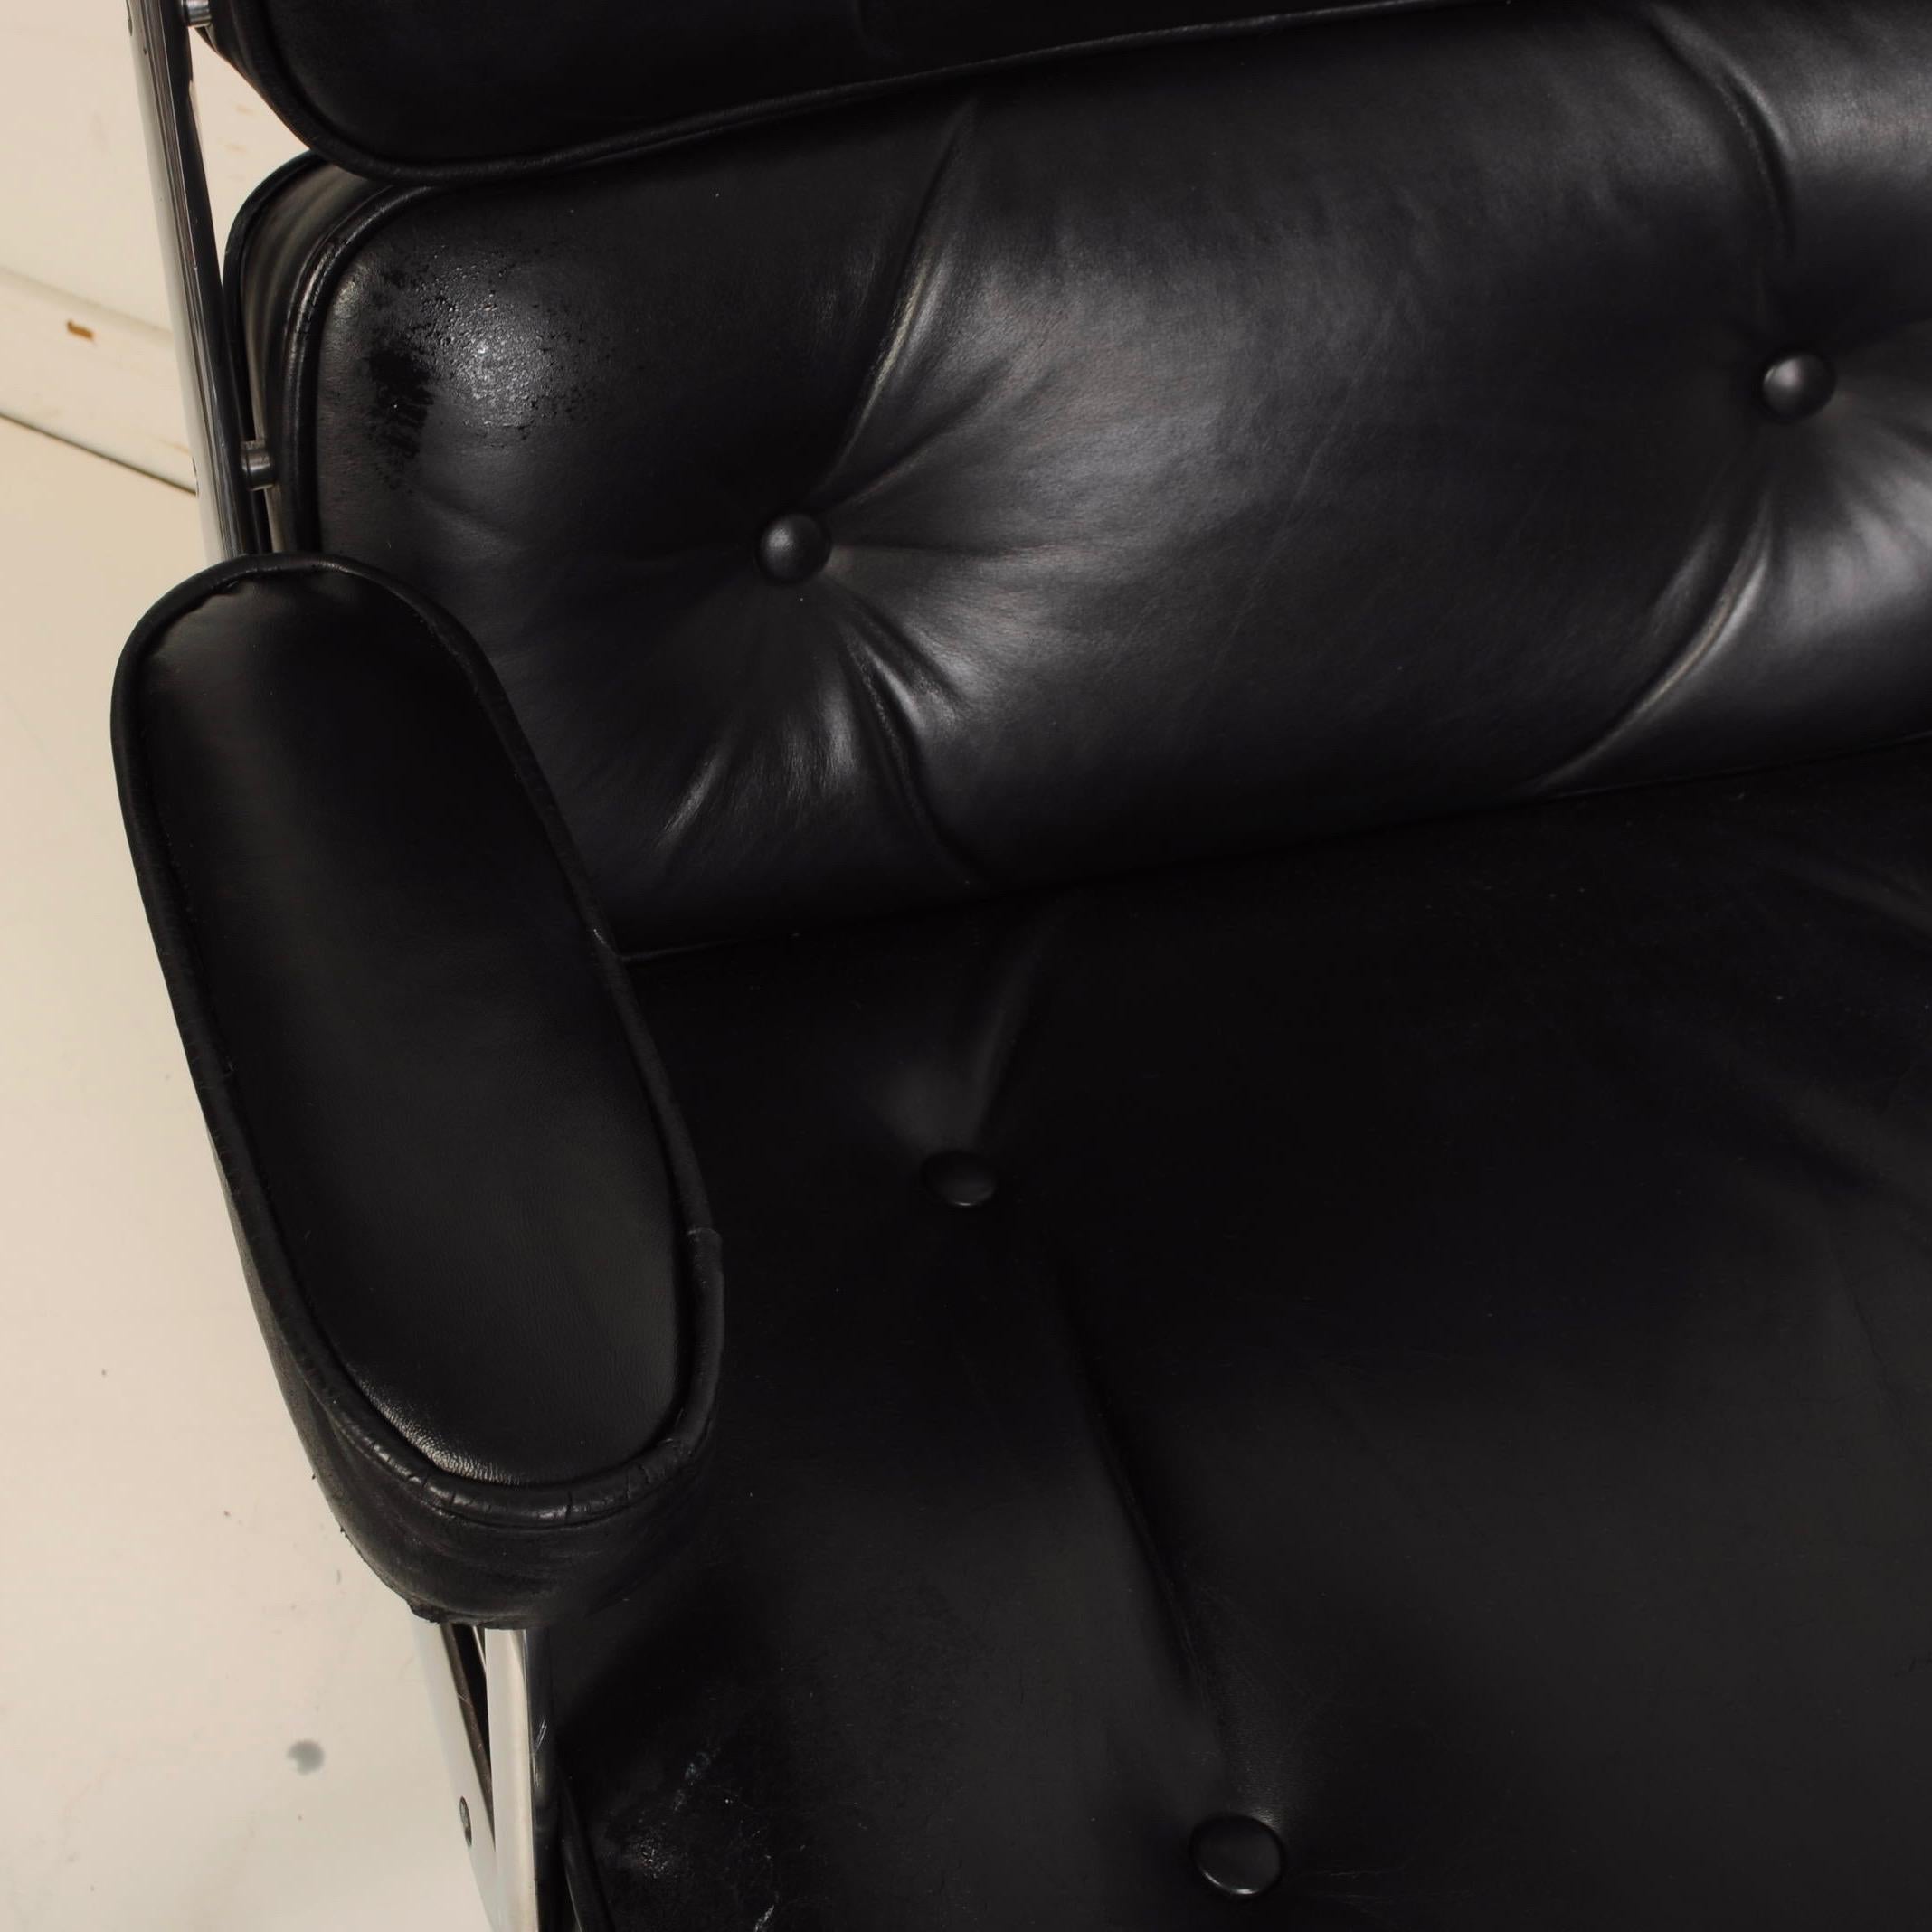 An executive office chair designed by Charles and Ray Eames, manufactured by Herman Miller, with tufted back, seat and armrest in black leather against aluminum frame, on segmented swivel base with caster wheels. Markings include manufacturer's